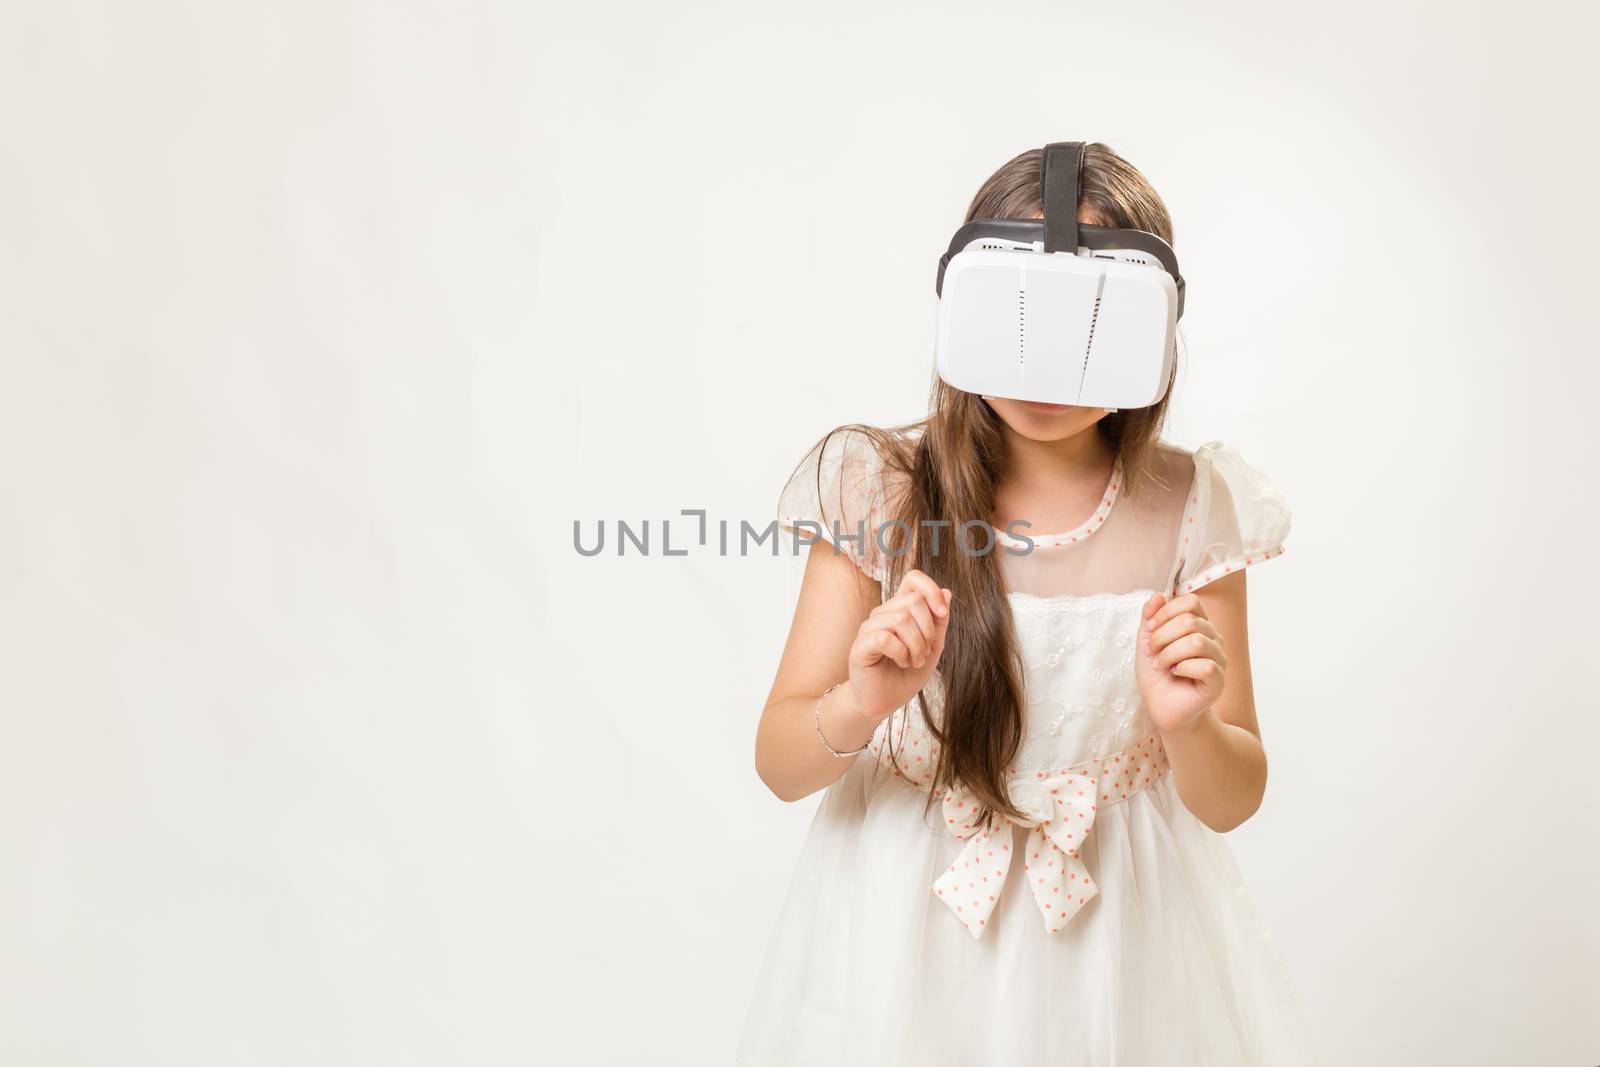 Young girl wearing virtual reality VR goggles